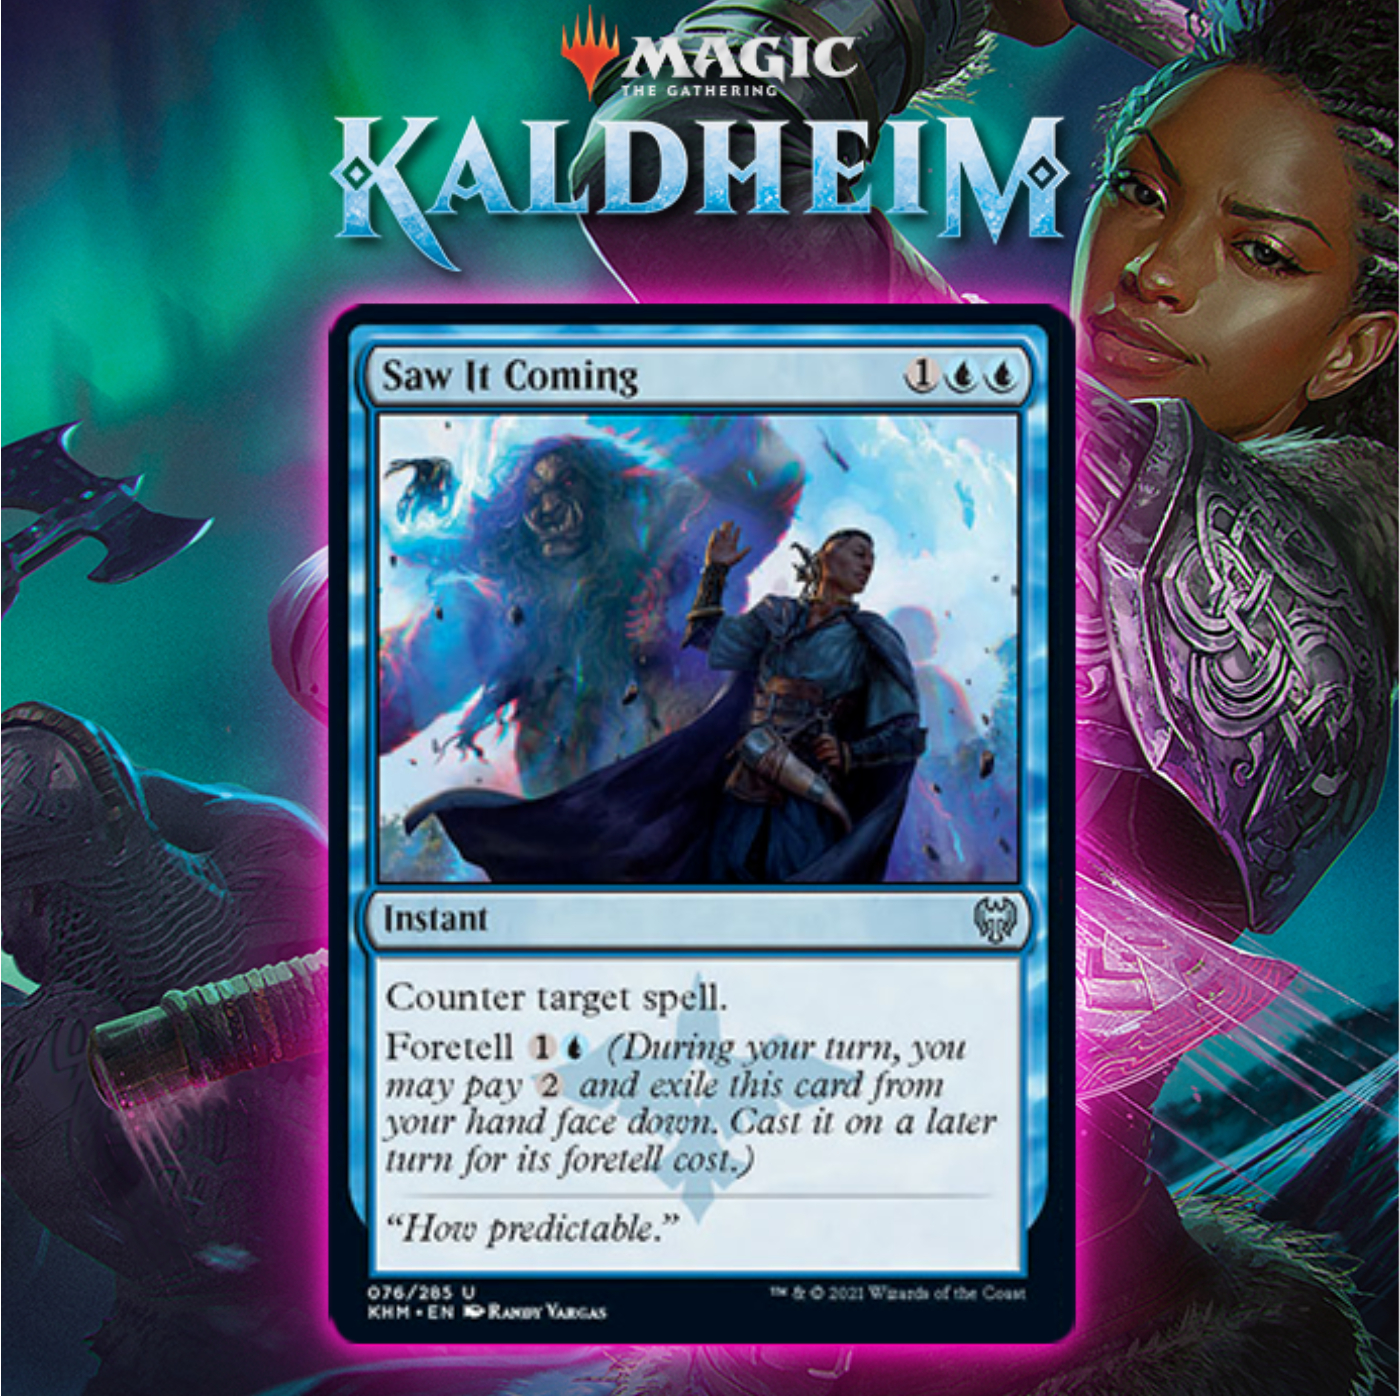 Blue Gets Foretell Counterspell In Saw It Coming In Kaldheim